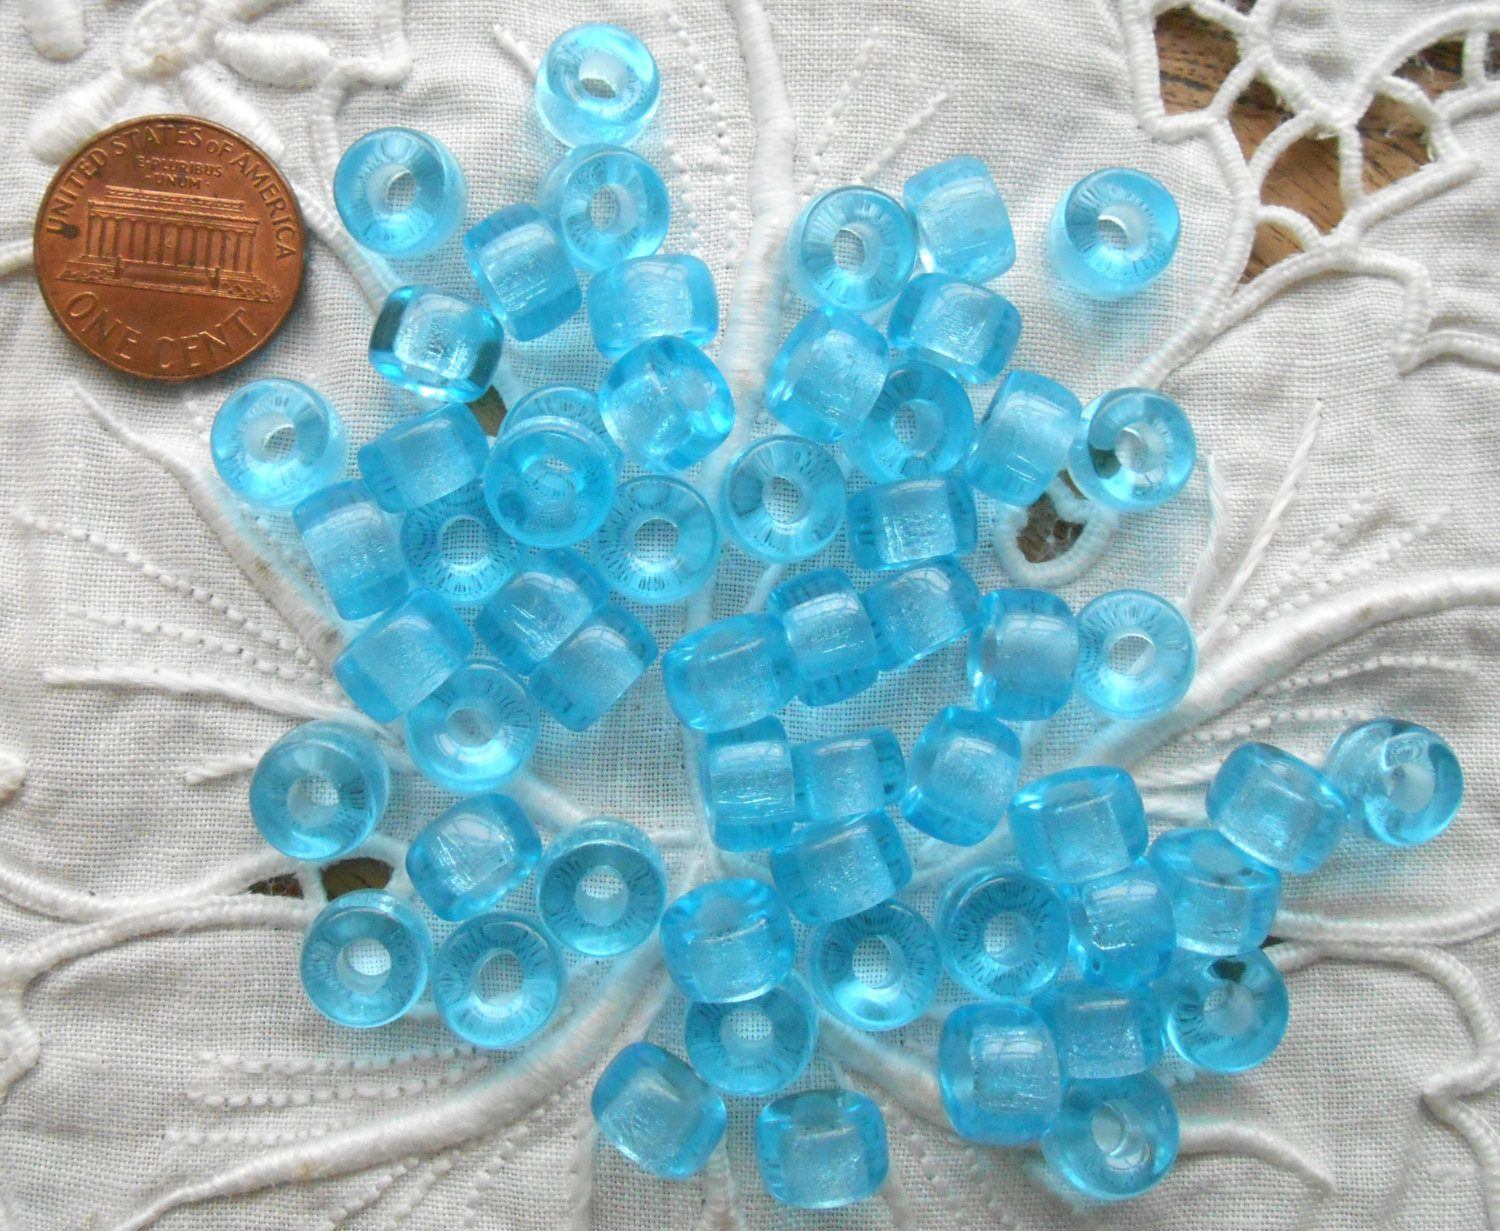 20 8mm Melon Beads 8mm Czech Glass Beads Large Hole Beads for